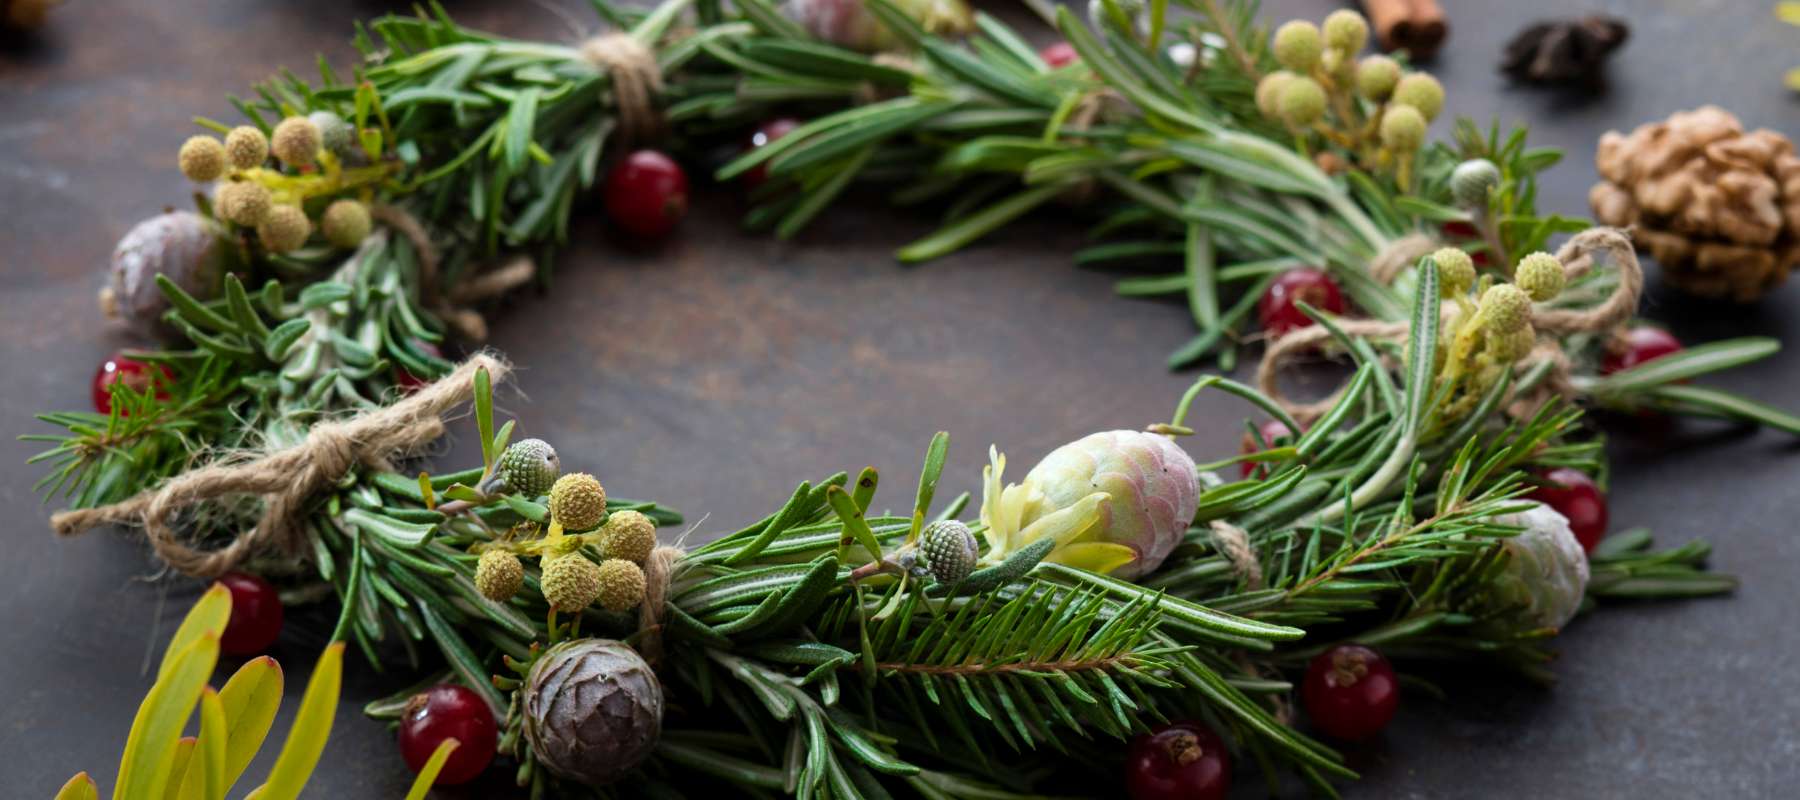 5 Uses for Rosemary During the Holidays